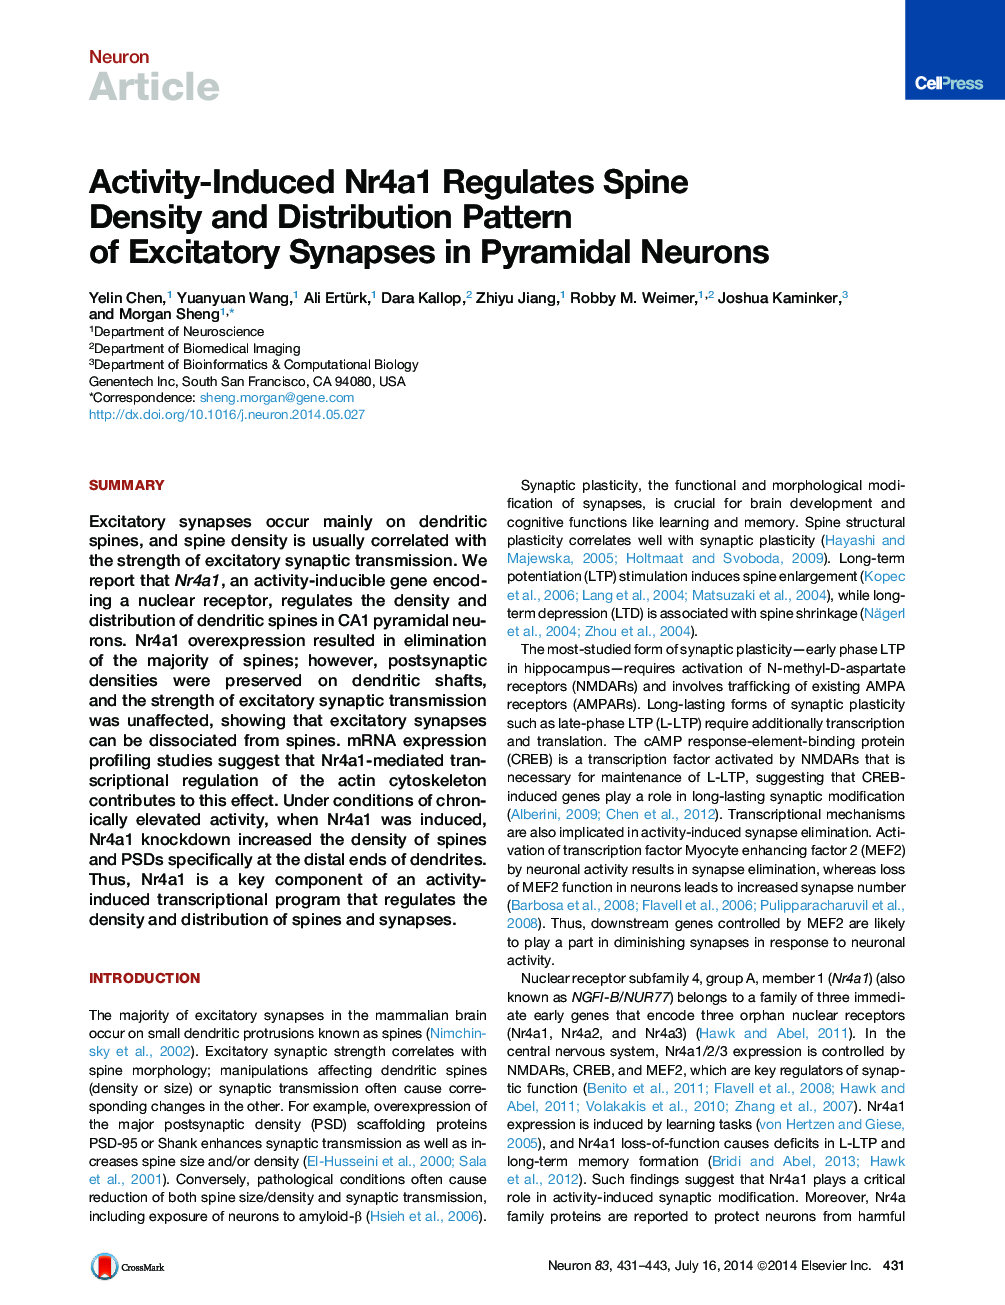 Activity-Induced Nr4a1 Regulates Spine Density and Distribution Pattern of Excitatory Synapses in Pyramidal Neurons